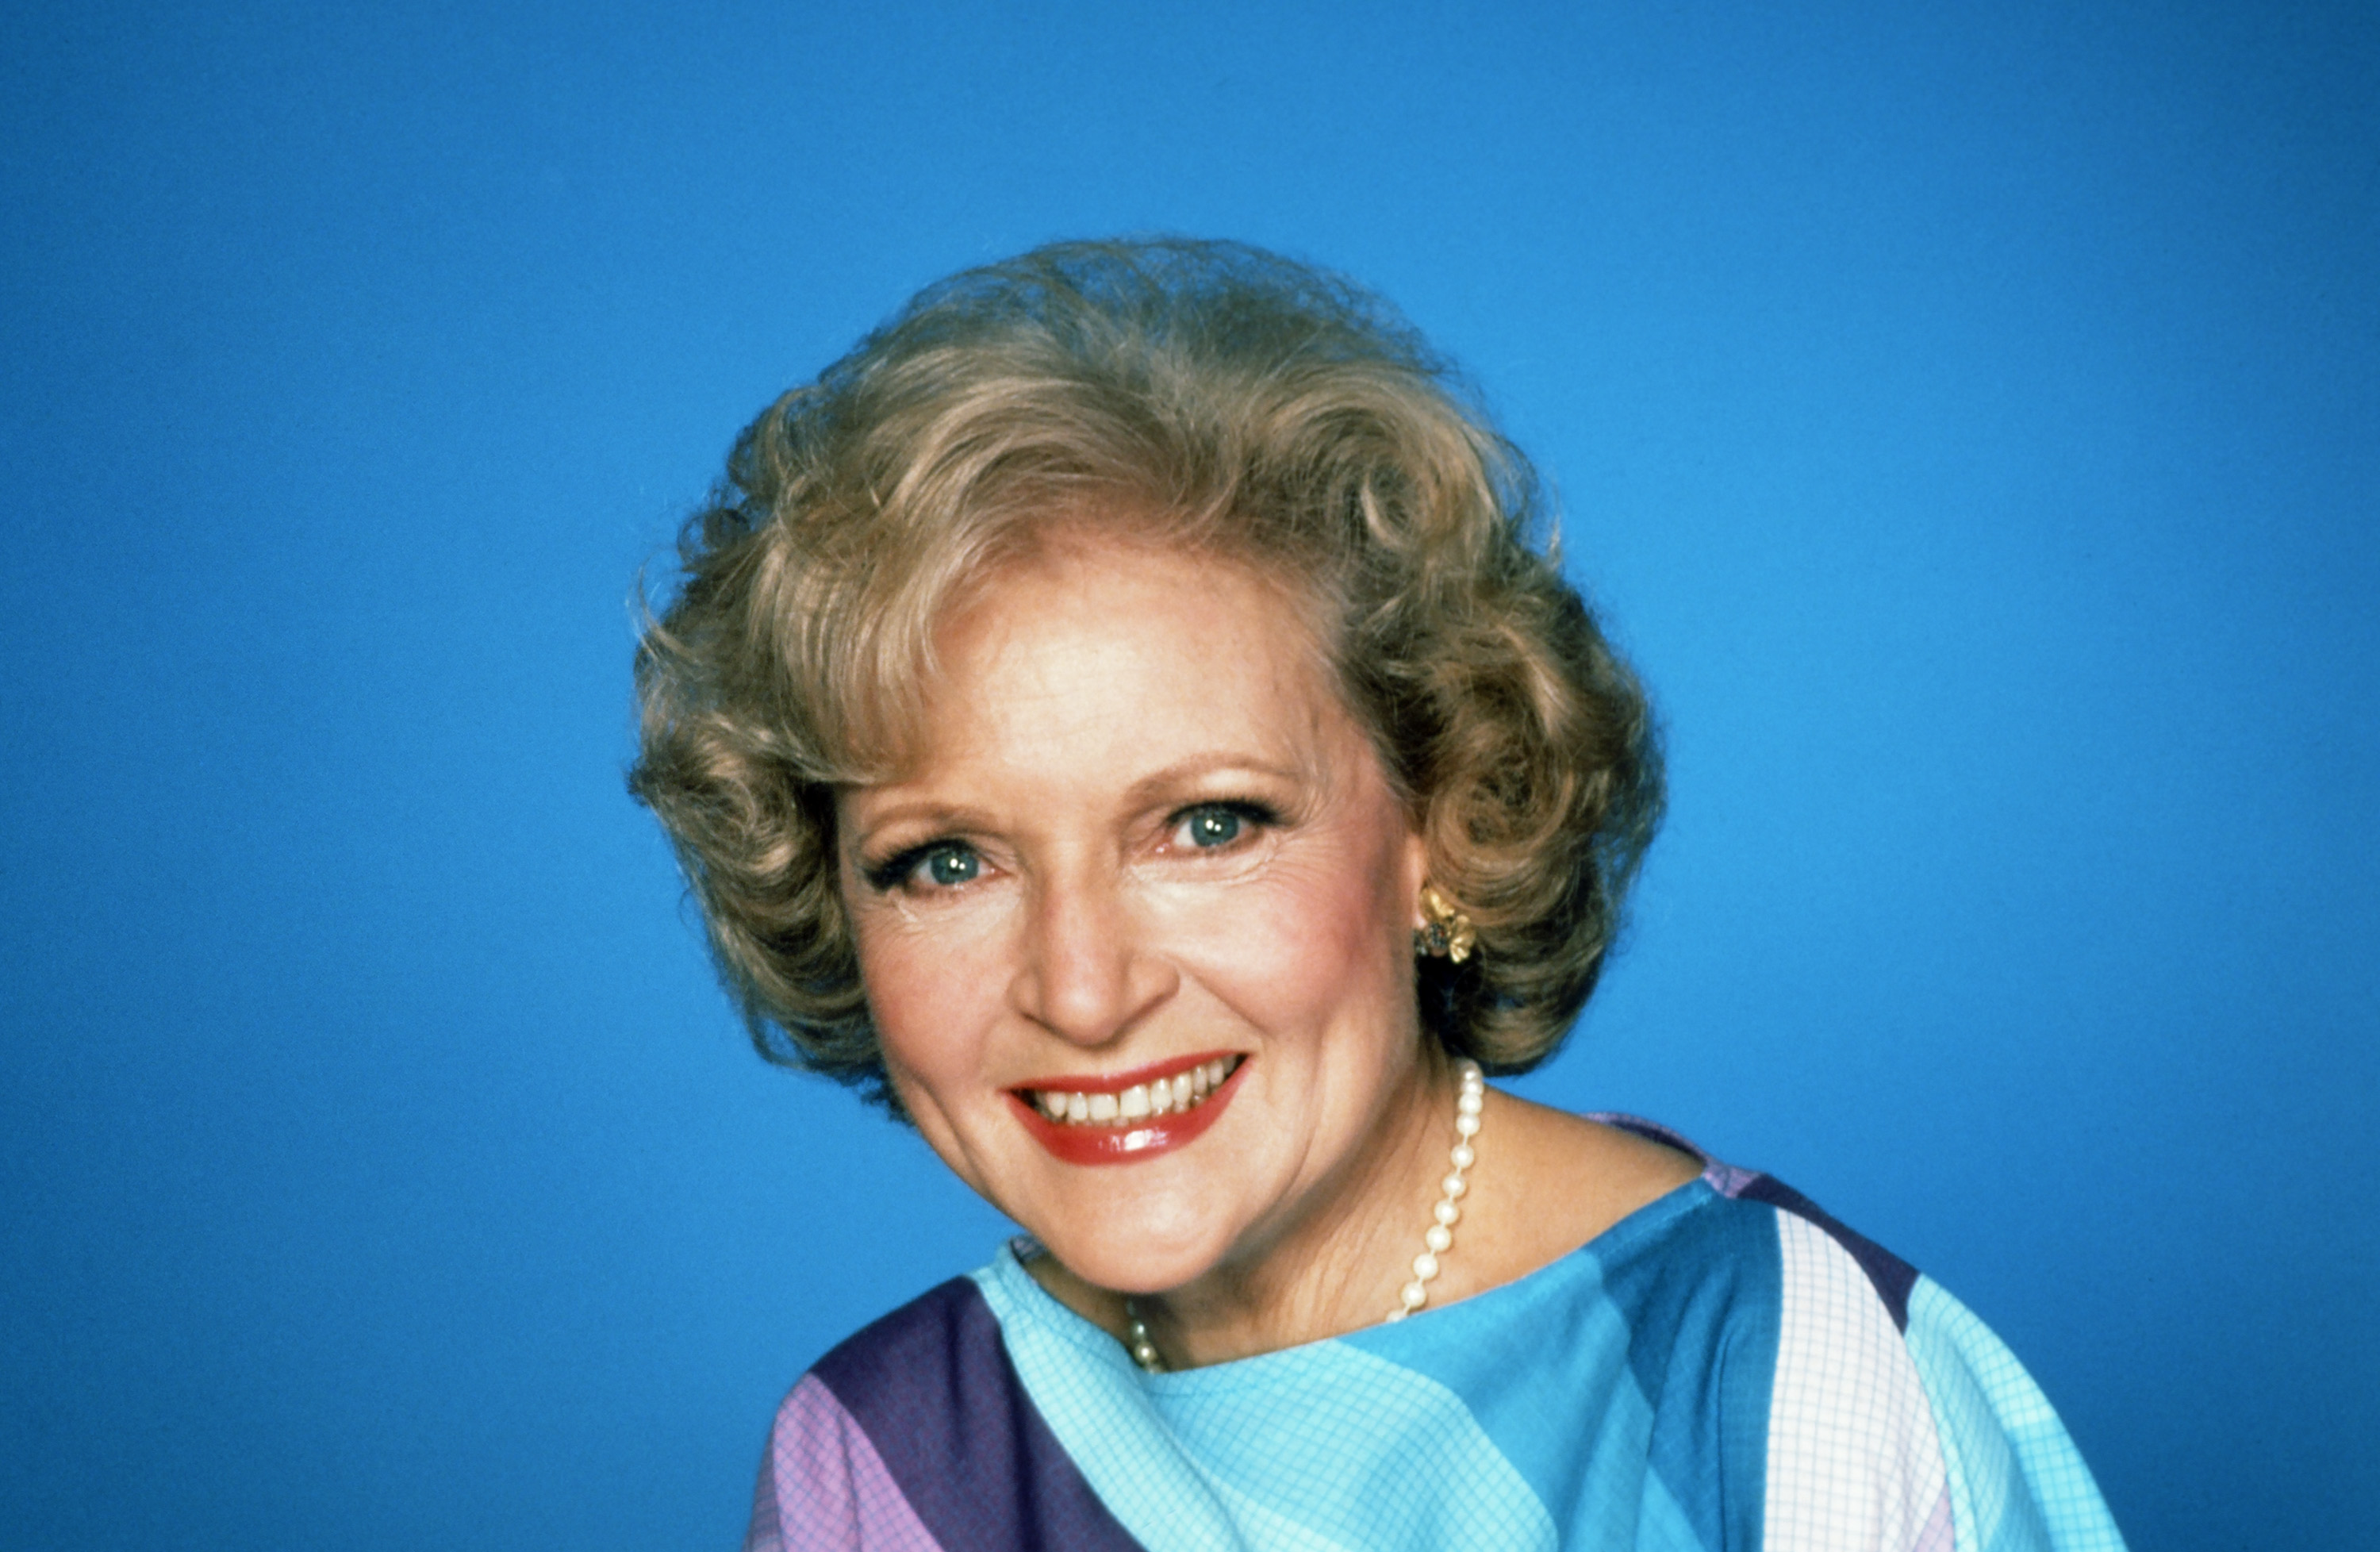 Betty White |  Herb Ball/NBCU Photo Bank/NBCUniversal via Getty Images via Getty Images